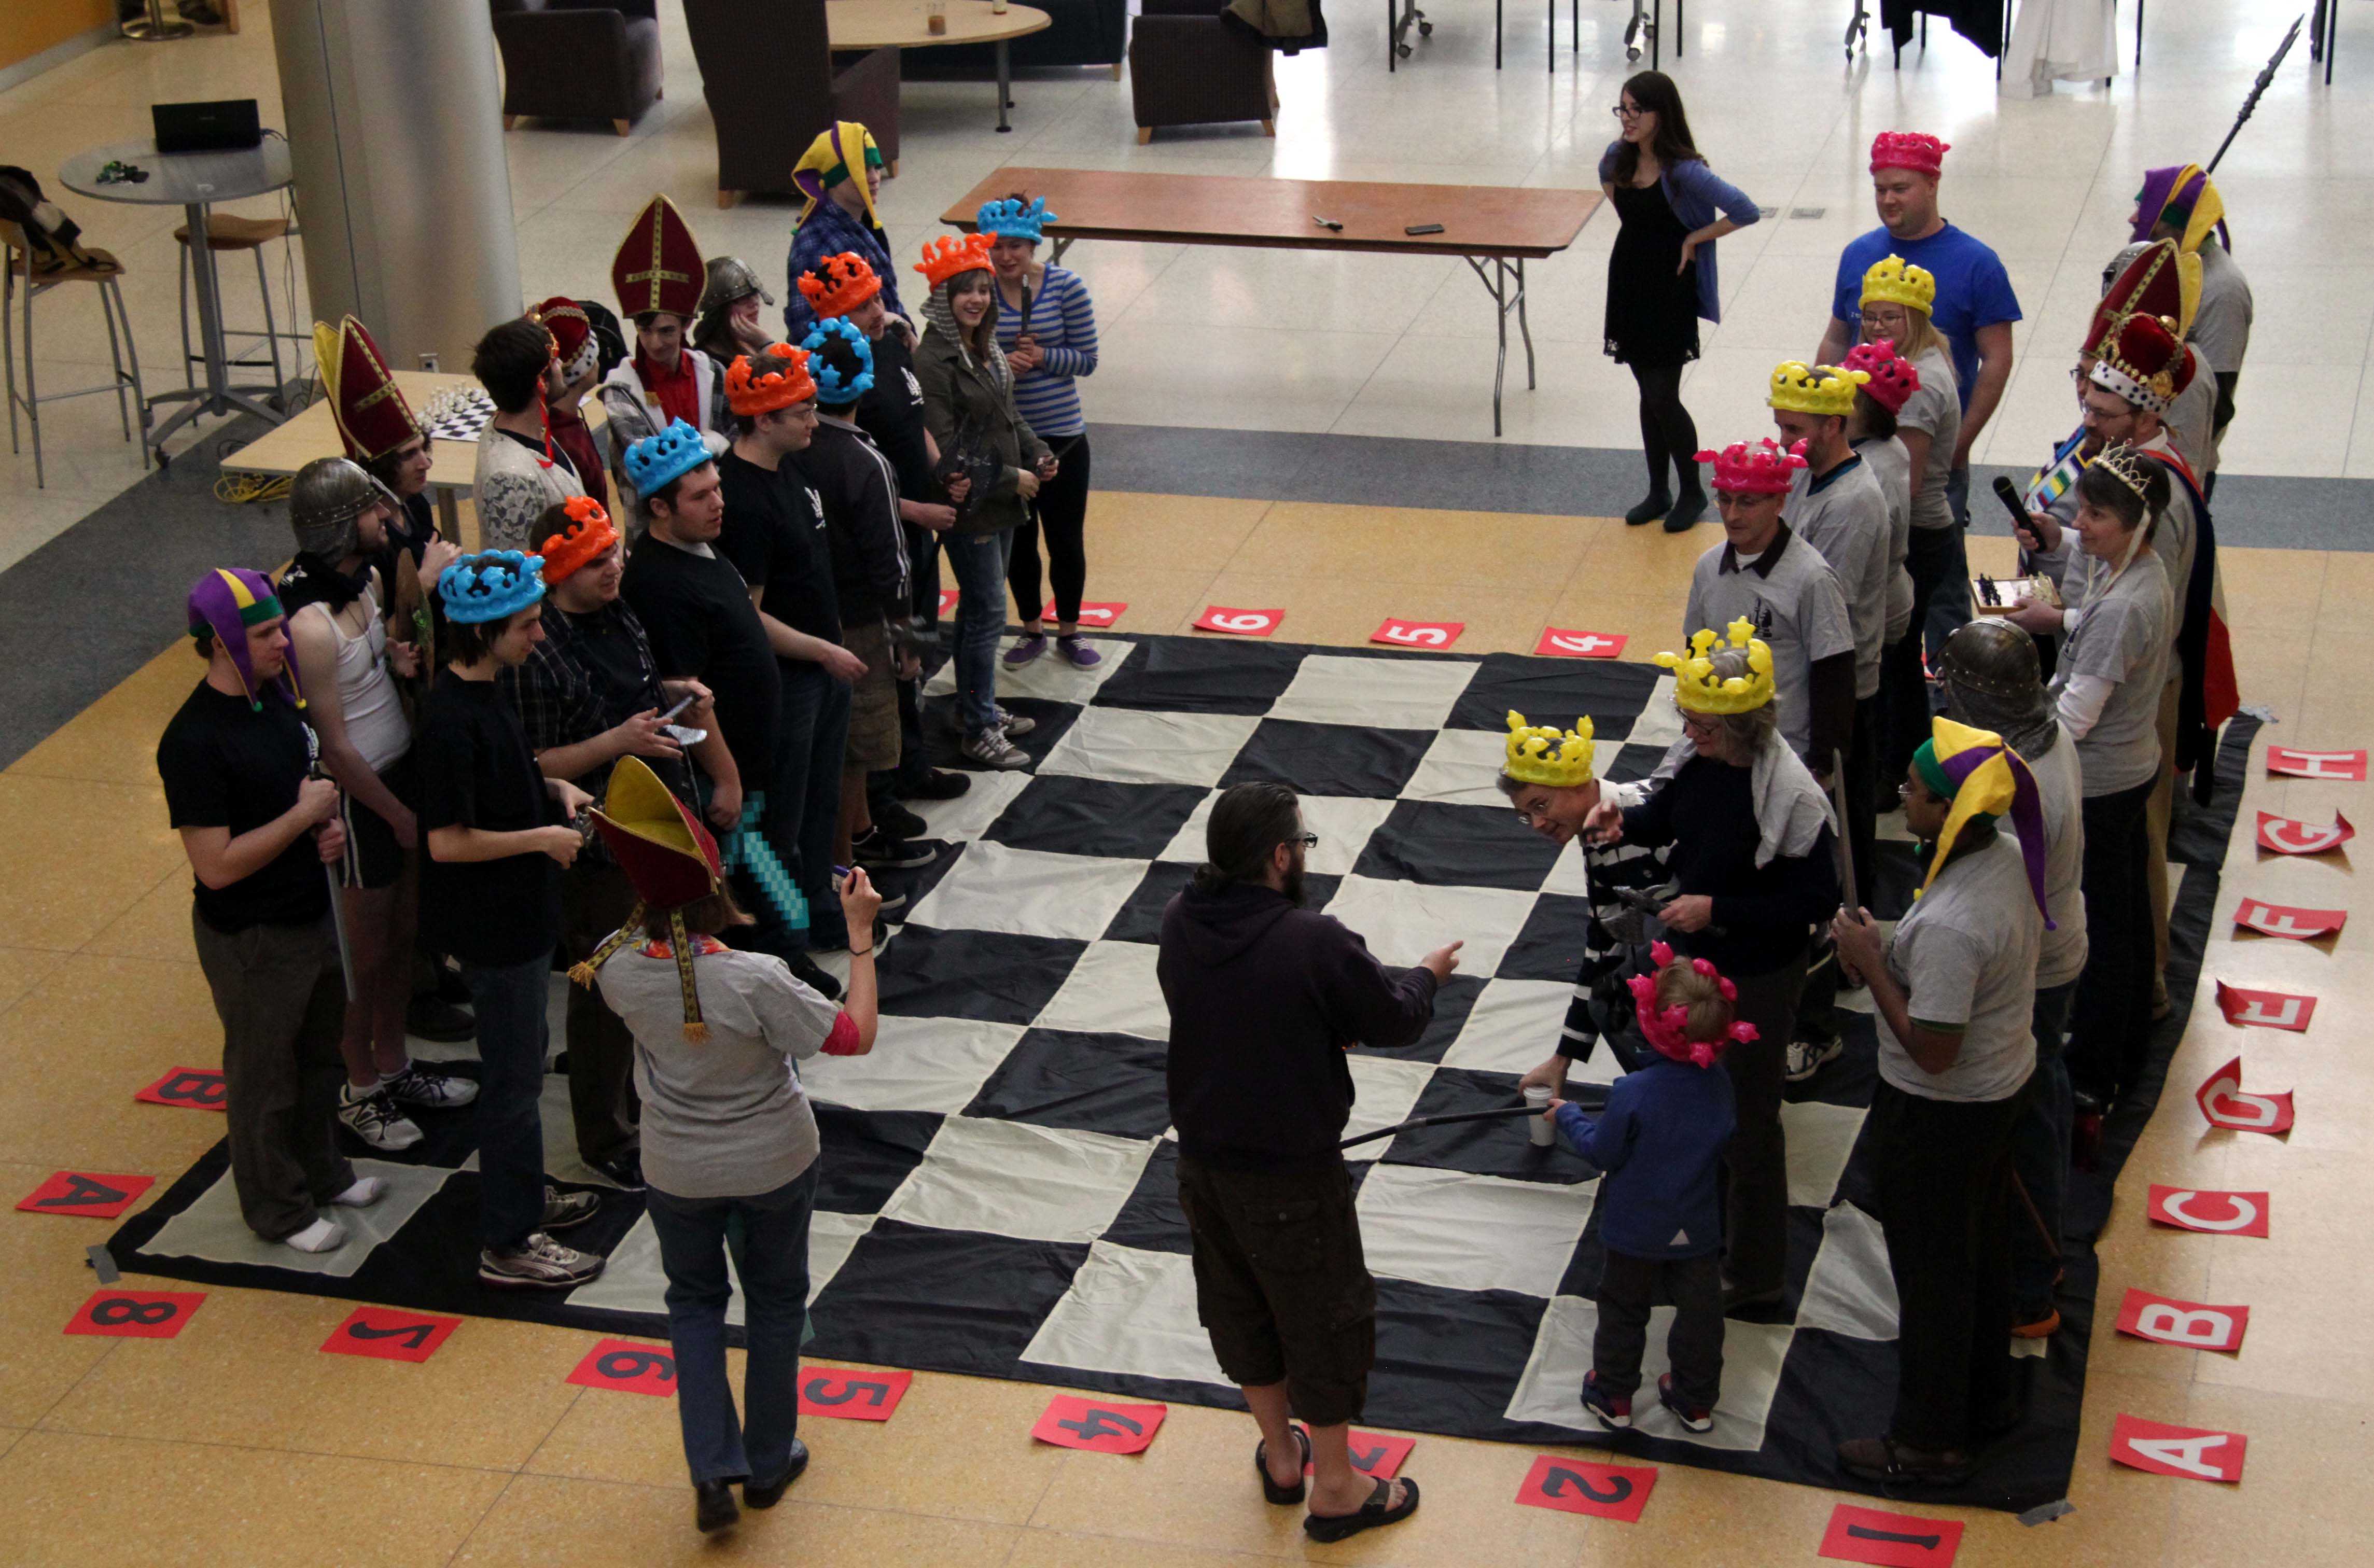 Human Chess Takes Over Campus Center – The Campus